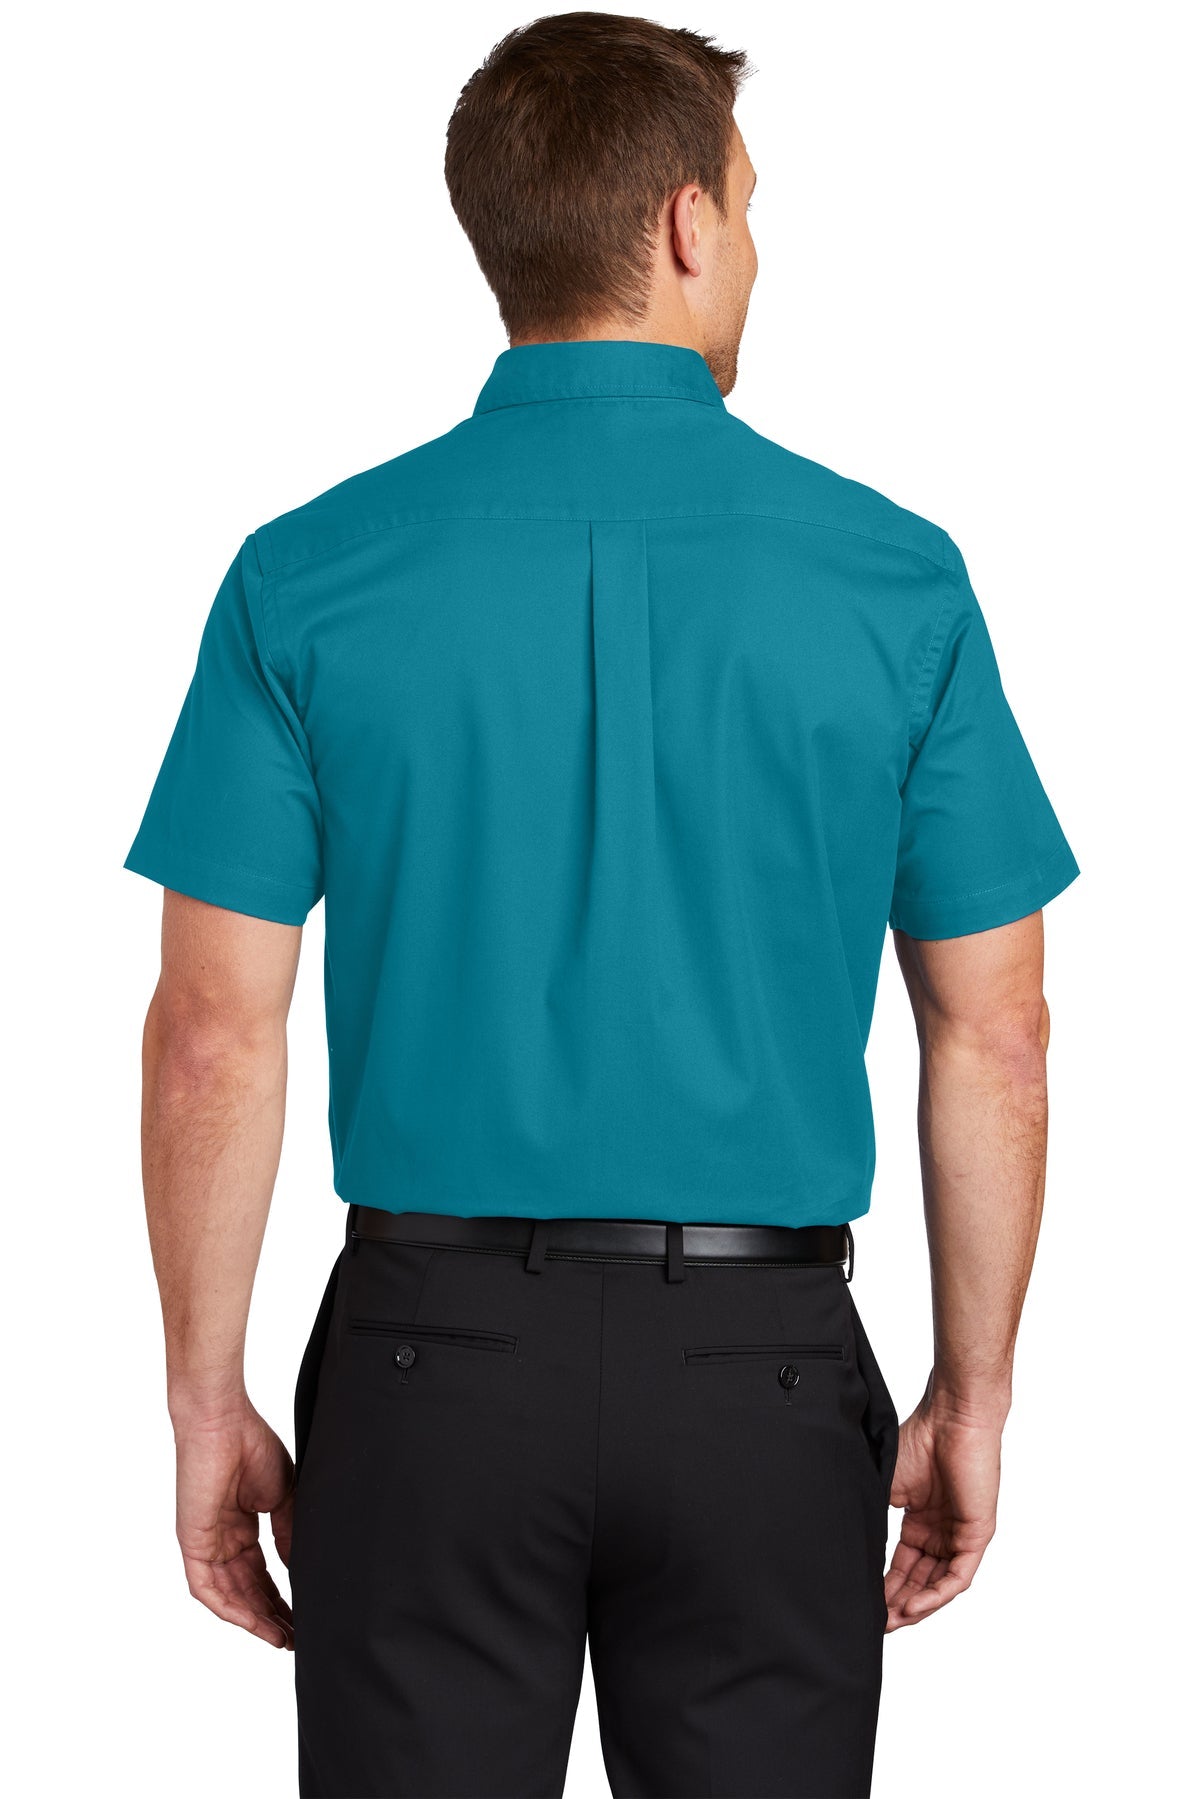 port authority_s508 _teal green_company_logo_button downs